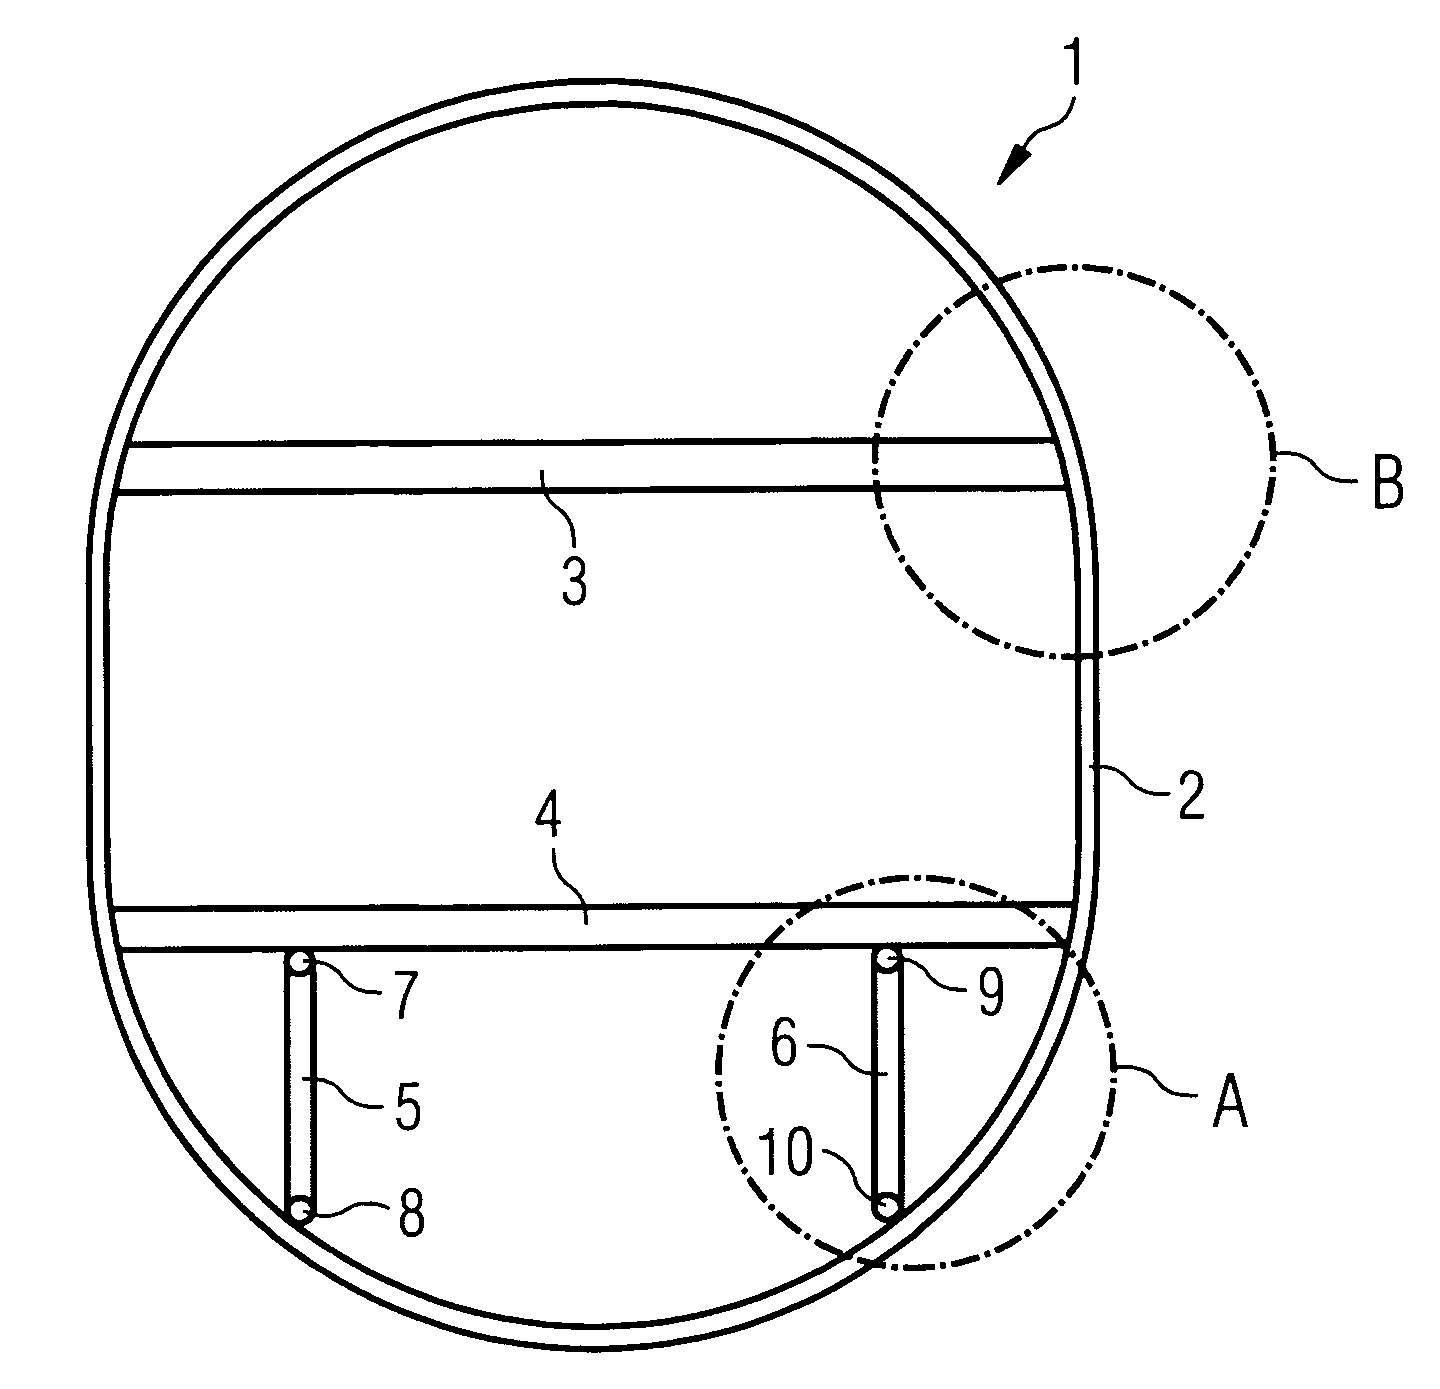 Structure element for an aircraft